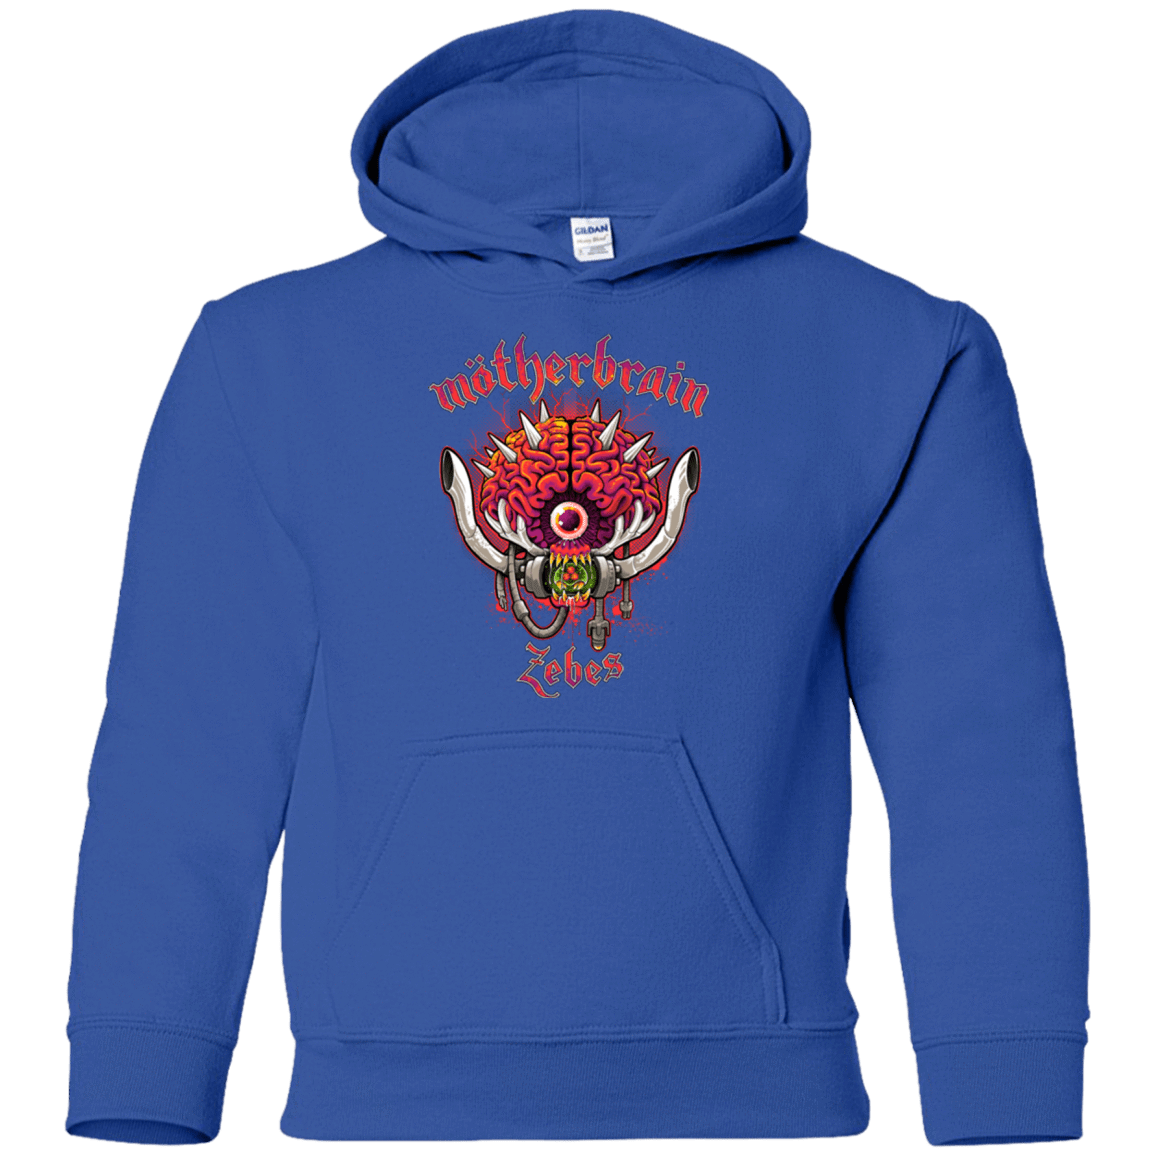 Sweatshirts Royal / YS Live From Zebes Youth Hoodie